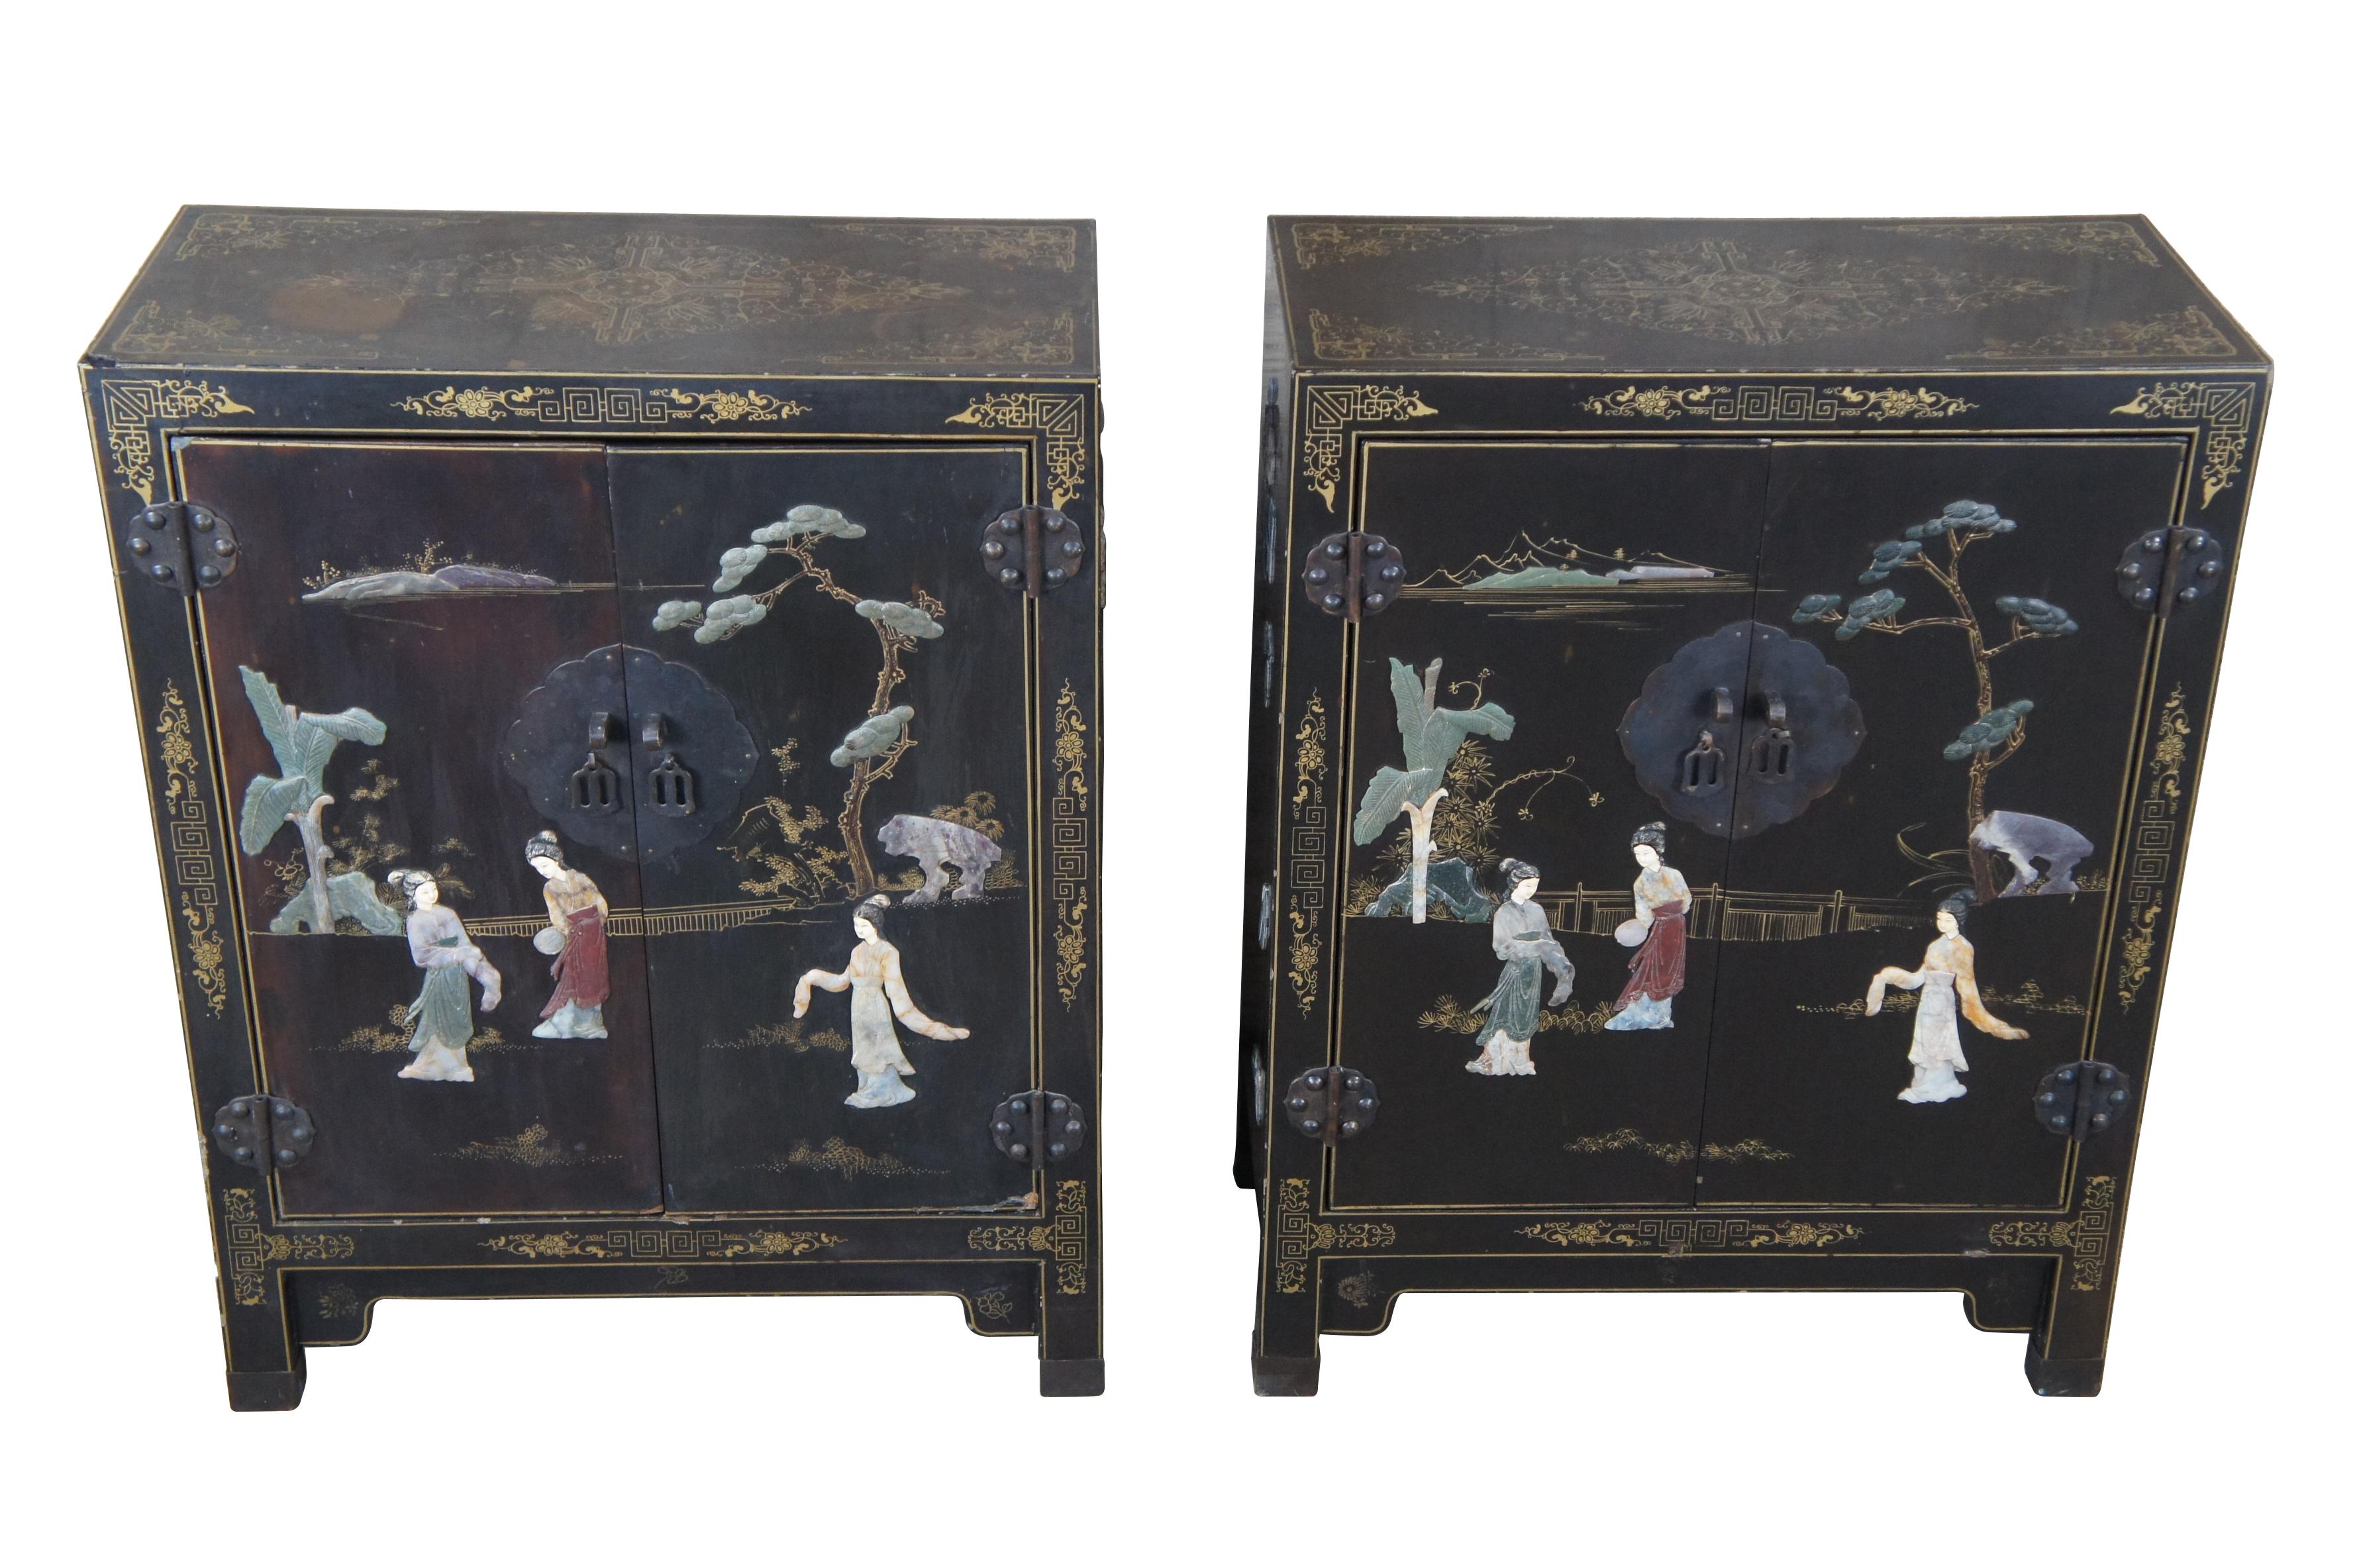 Magnificent pair of Chinese Lacquered Low Scholars Cabinets, circa second half 20th century. Double Doors Open to Single Shelf over shaped apron. Each features Carved Hardstone and intricate gold filigree / latticework designs with social scenes. 